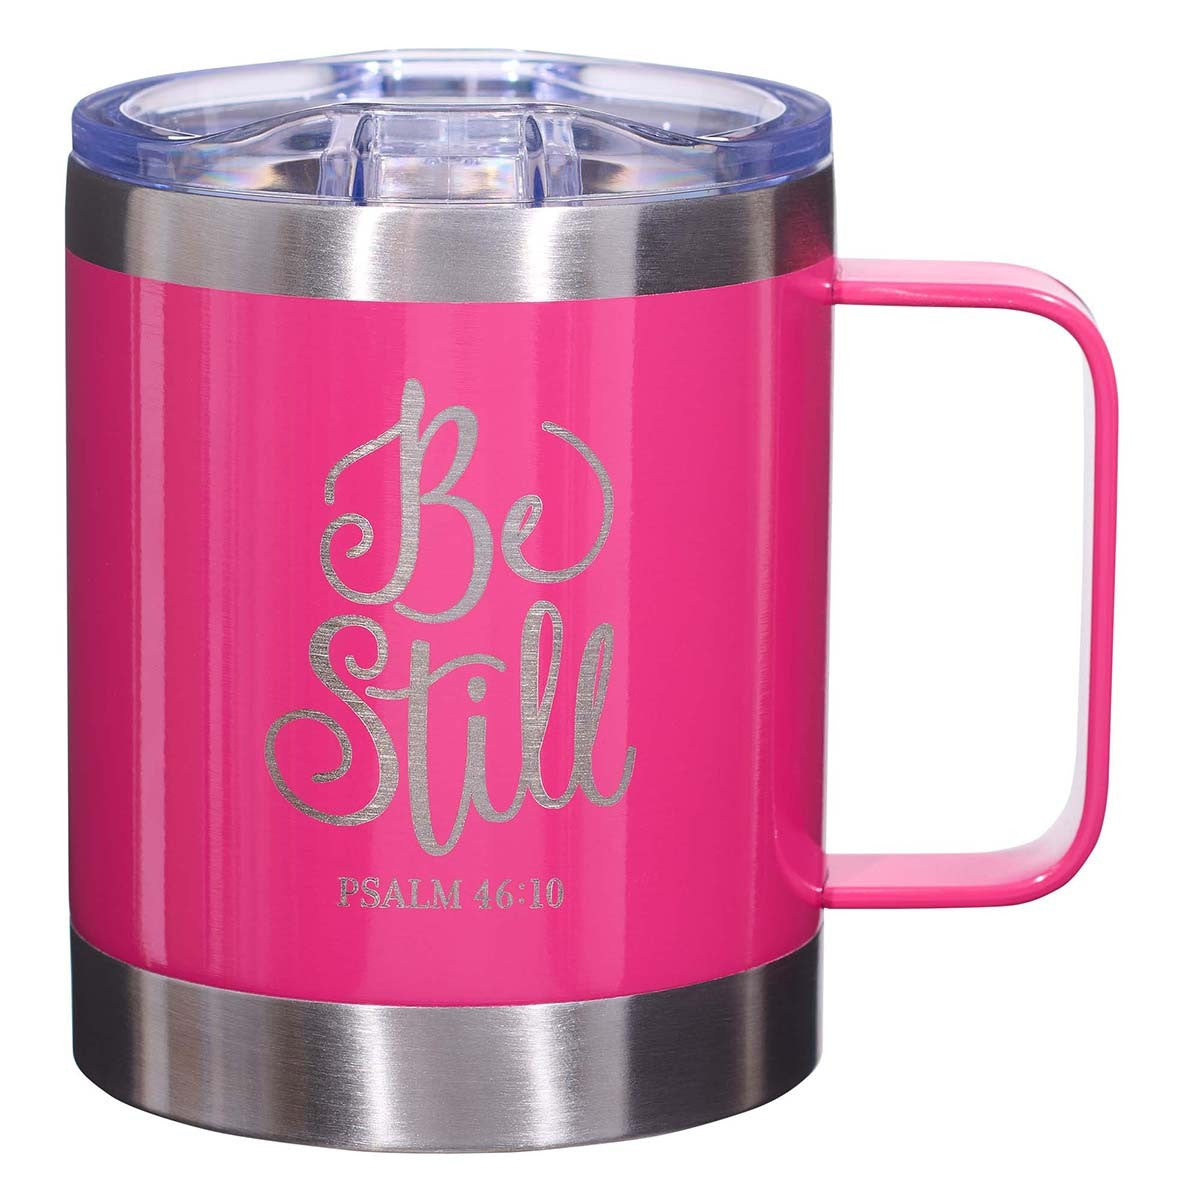 Be Still Pink Camp-style Stainless Steel Mug - Psalm 46:10 – Reger's Church  Supplies & Religious Gifts